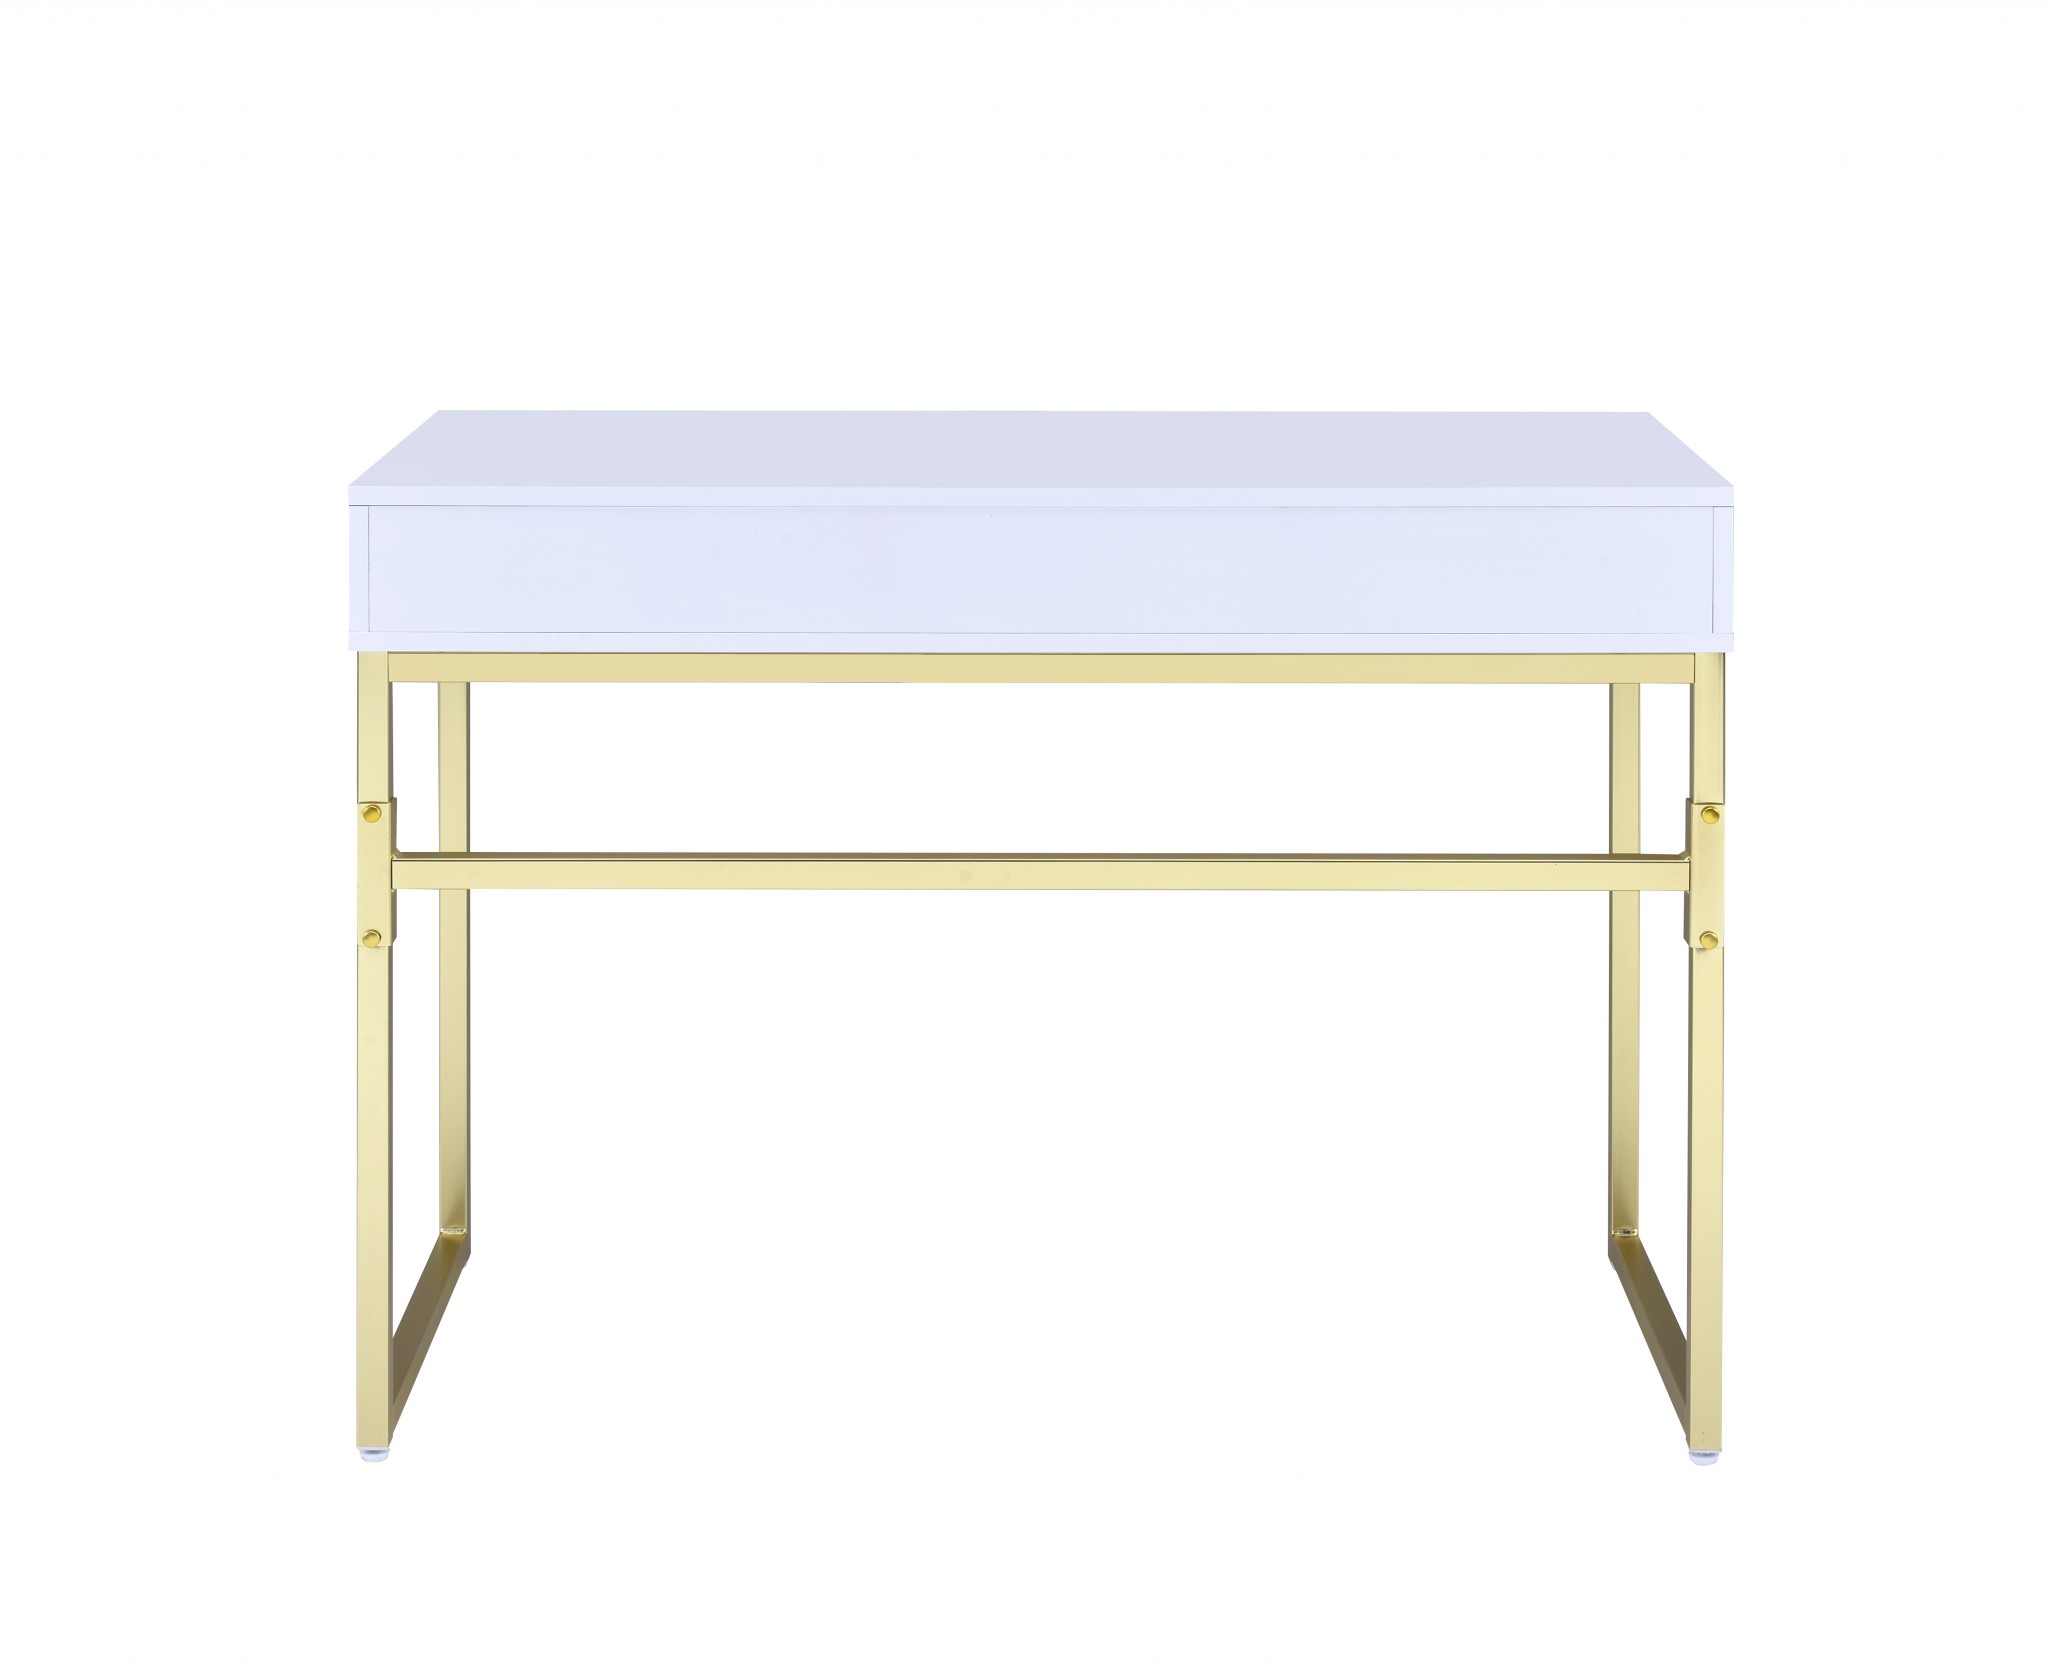 42" X 19" X 31" White And Brass Particle Board Desk